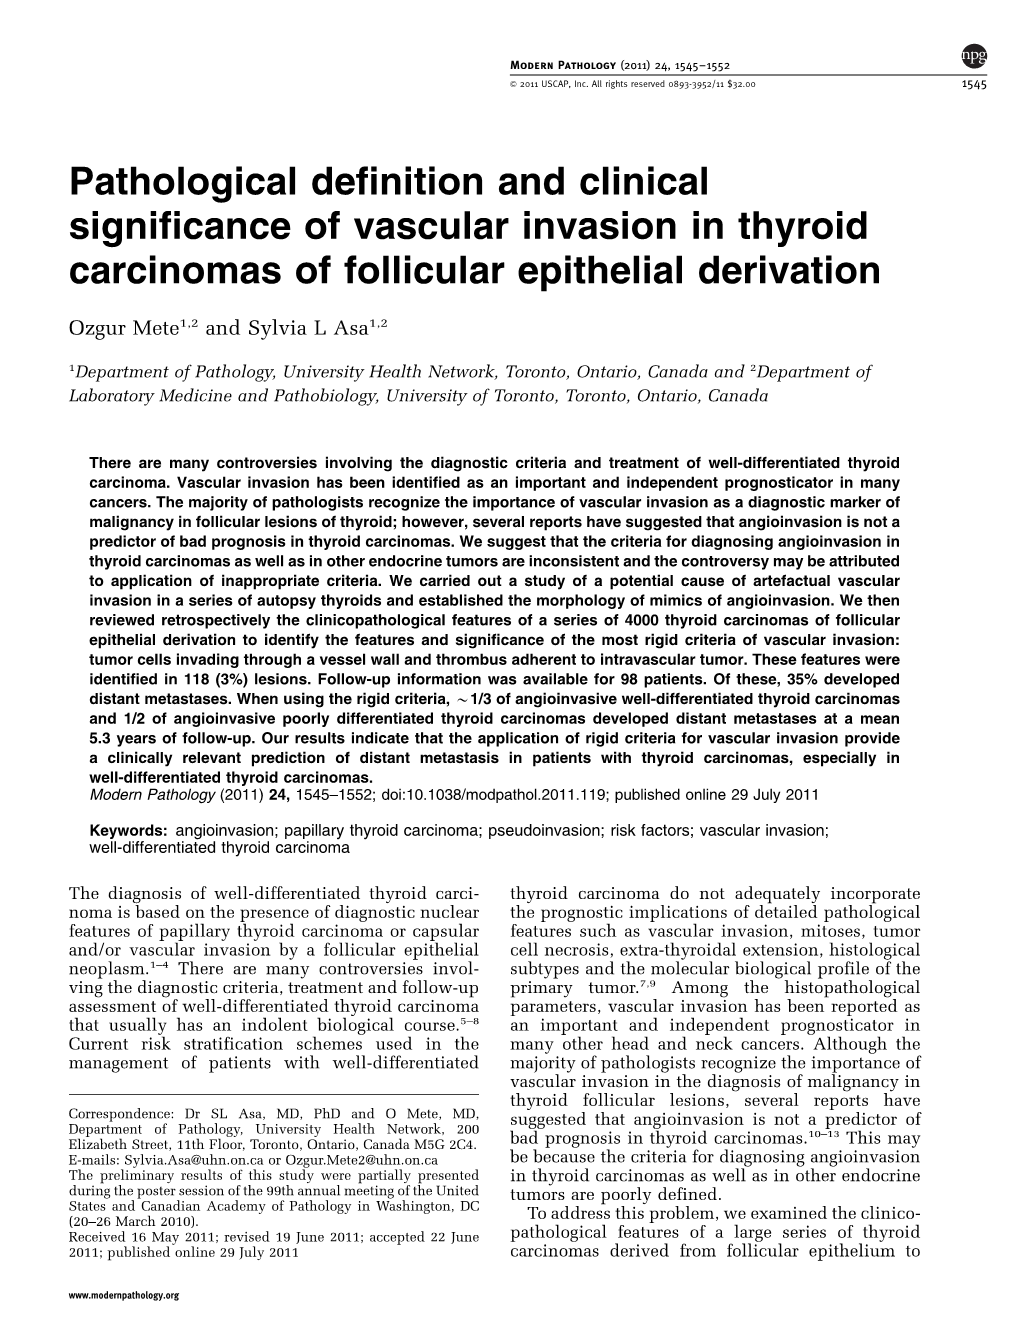 Pathological Definition and Clinical Significance of Vascular Invasion in Thyroid Carcinomas of Follicular Epithelial Derivation